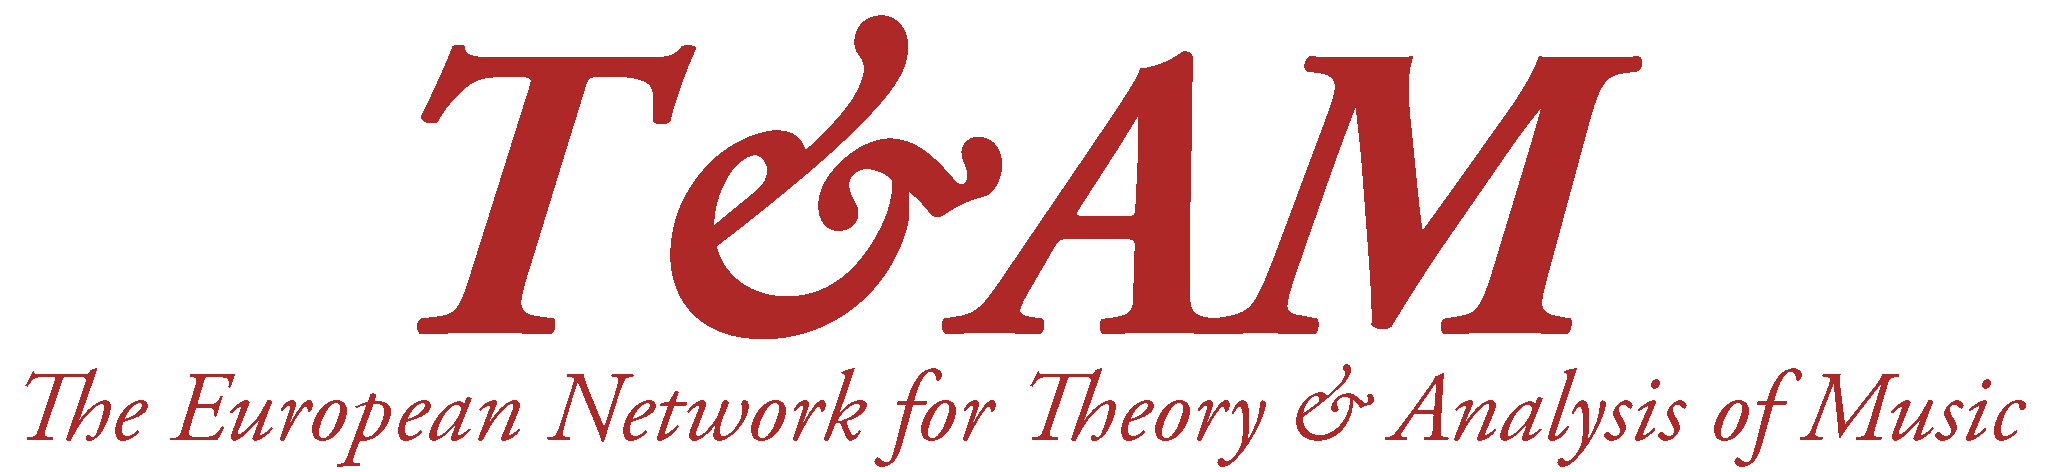 You are currently viewing 15th Biennial International Conference on Music Theory and Analysis